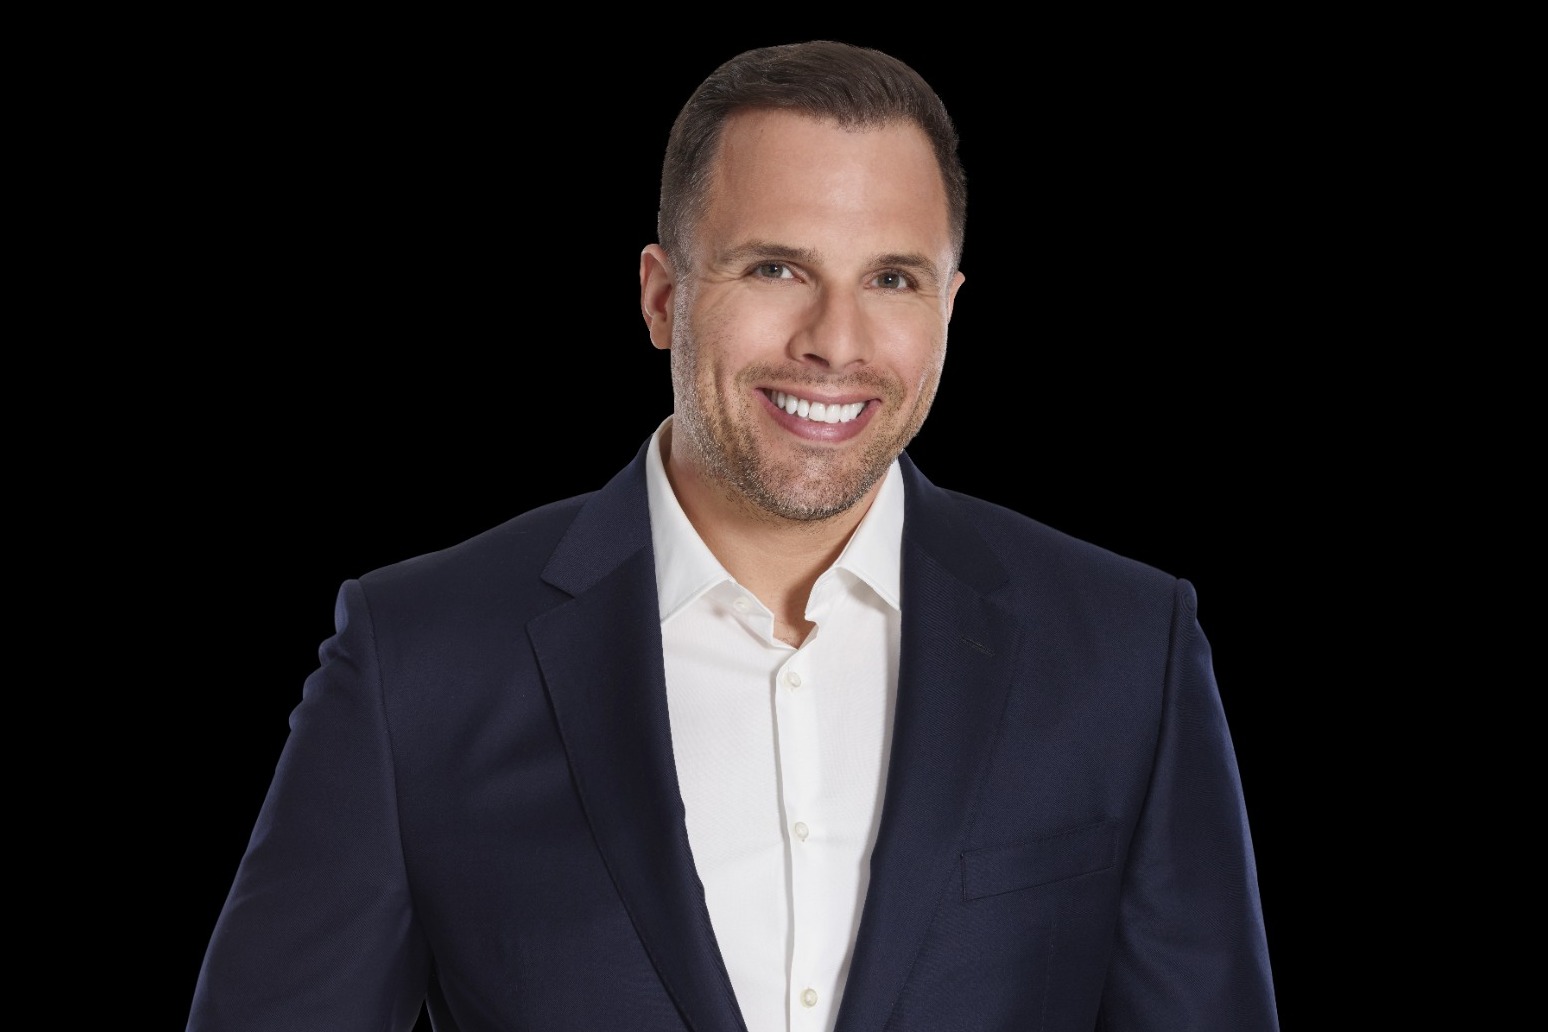 Dan Wootton suspended from GB News after Laurence Fox’s on-air remarks 